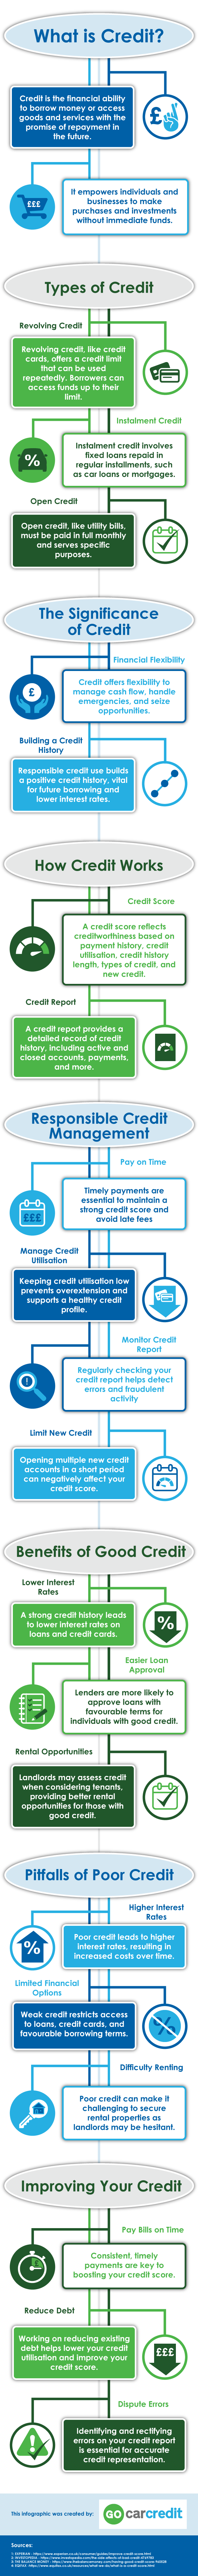 What-is-credit-infographic